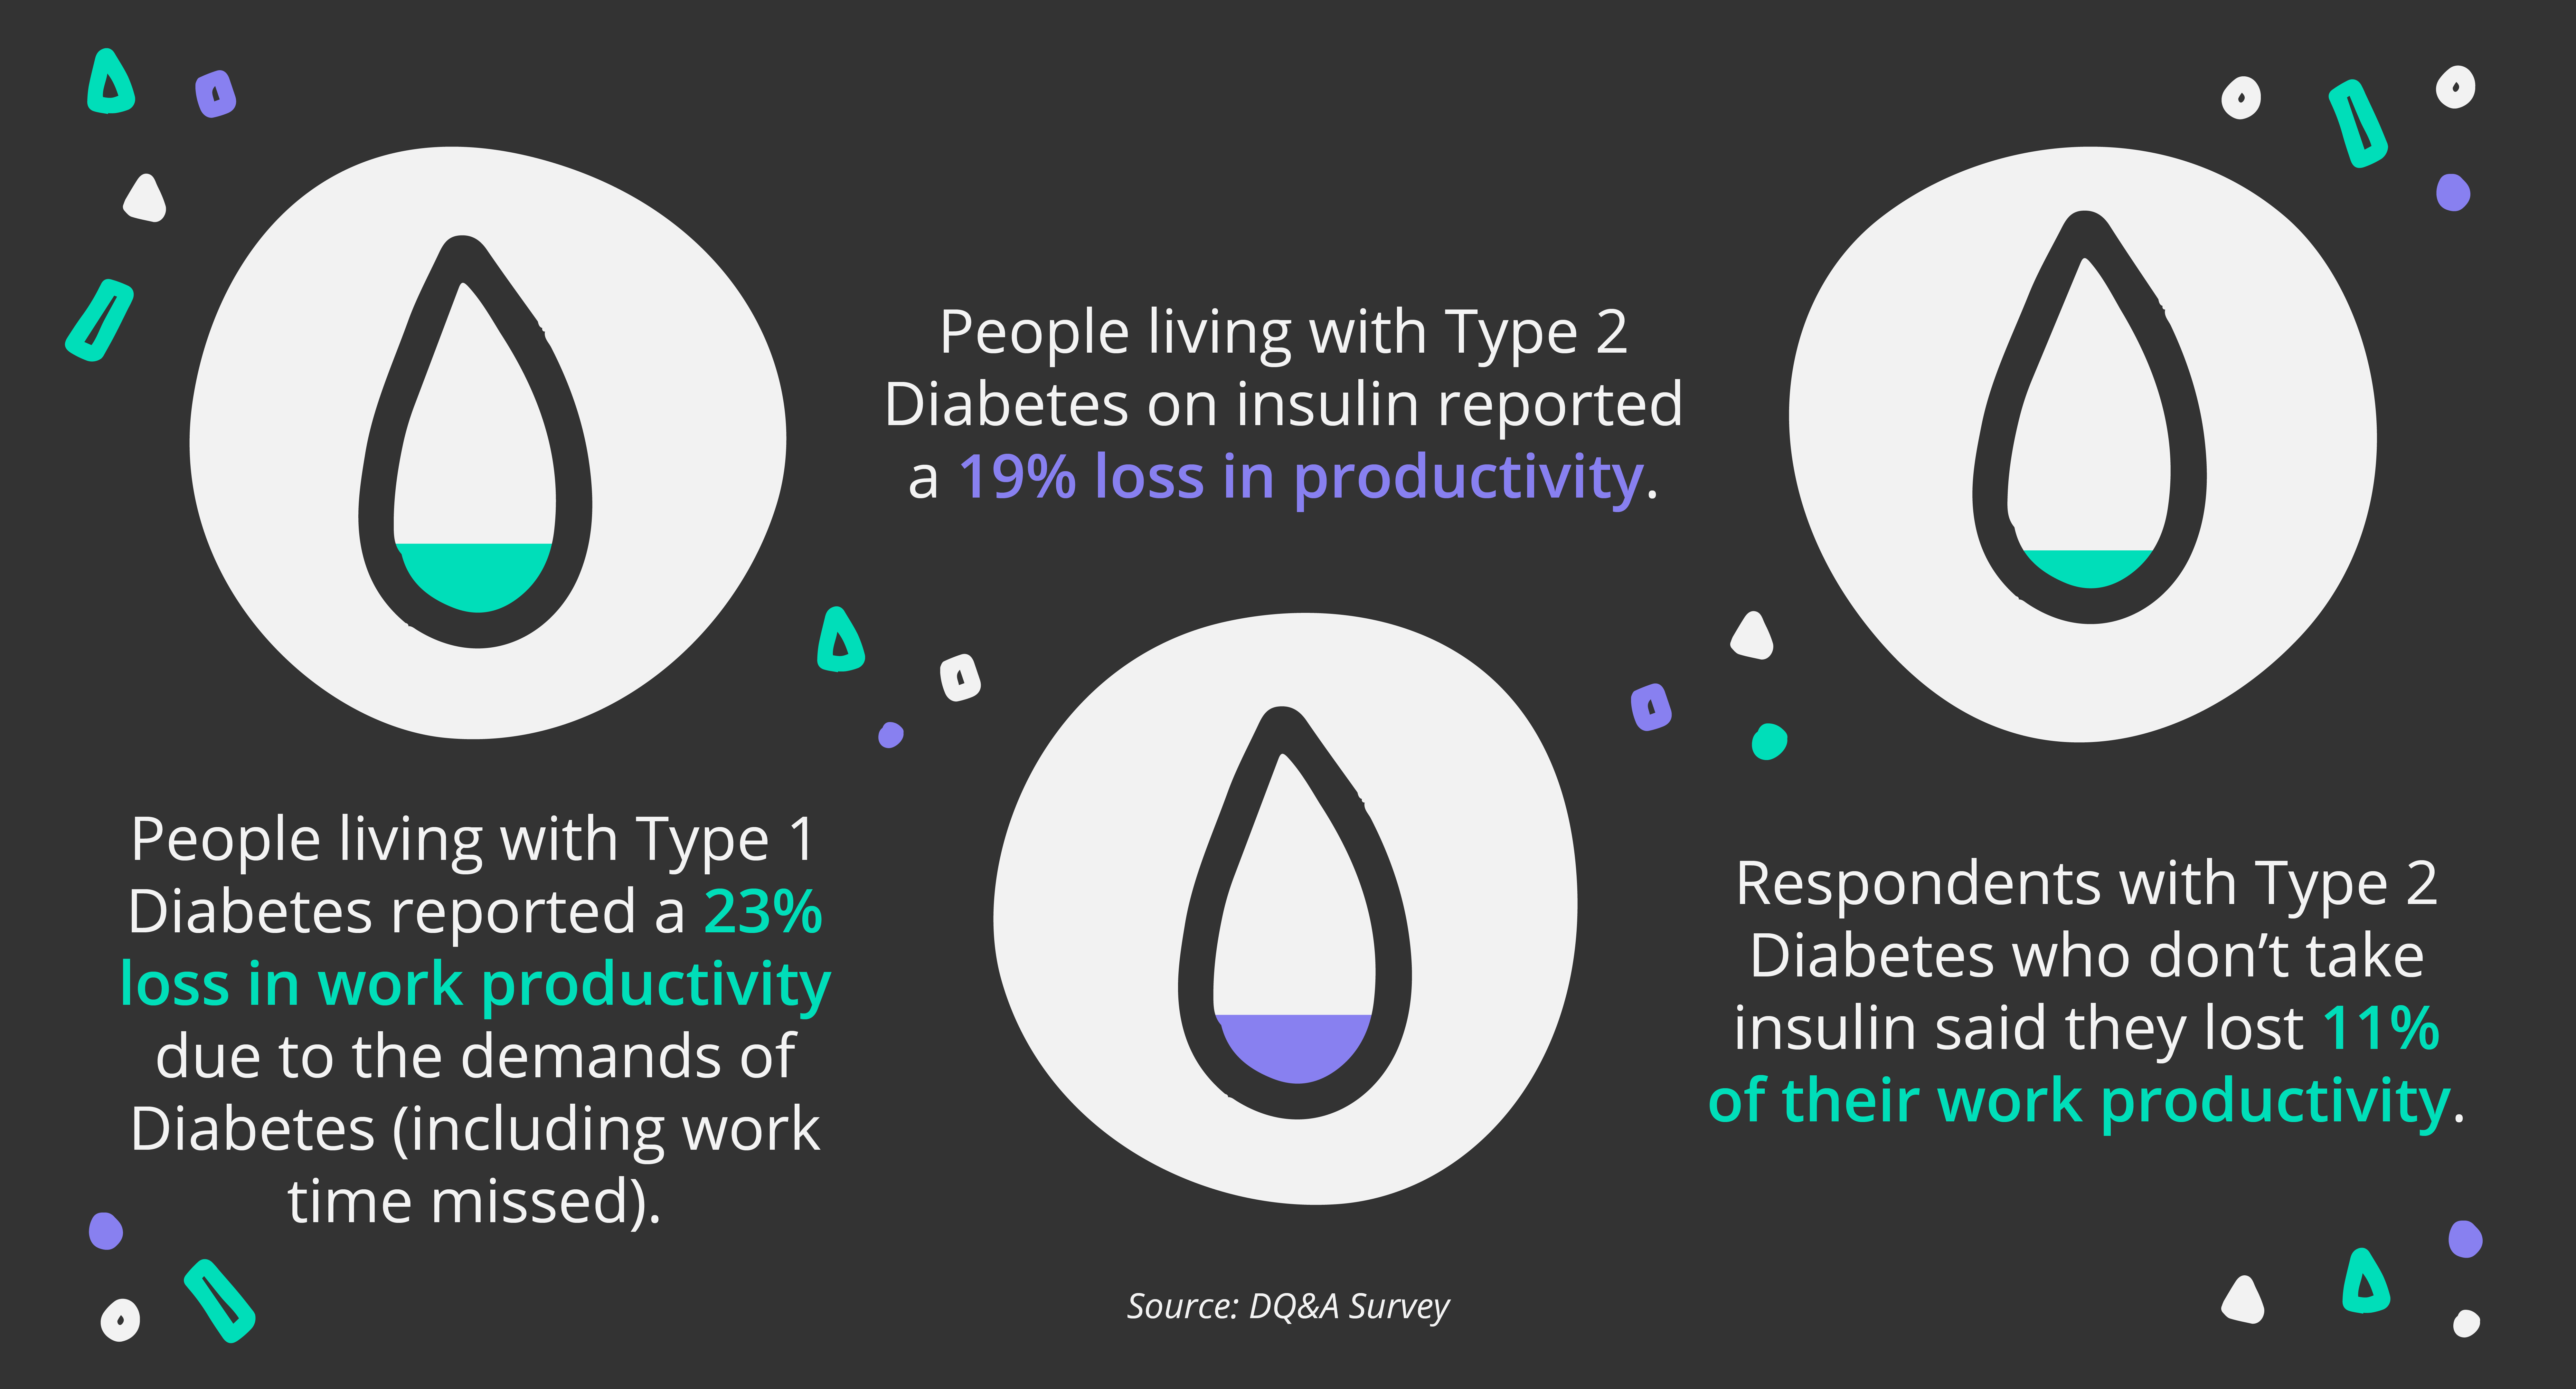 People living with Type 1 Diabetes reported a 23% loss in work productivity due to the demands of diabetes (including work time missed).